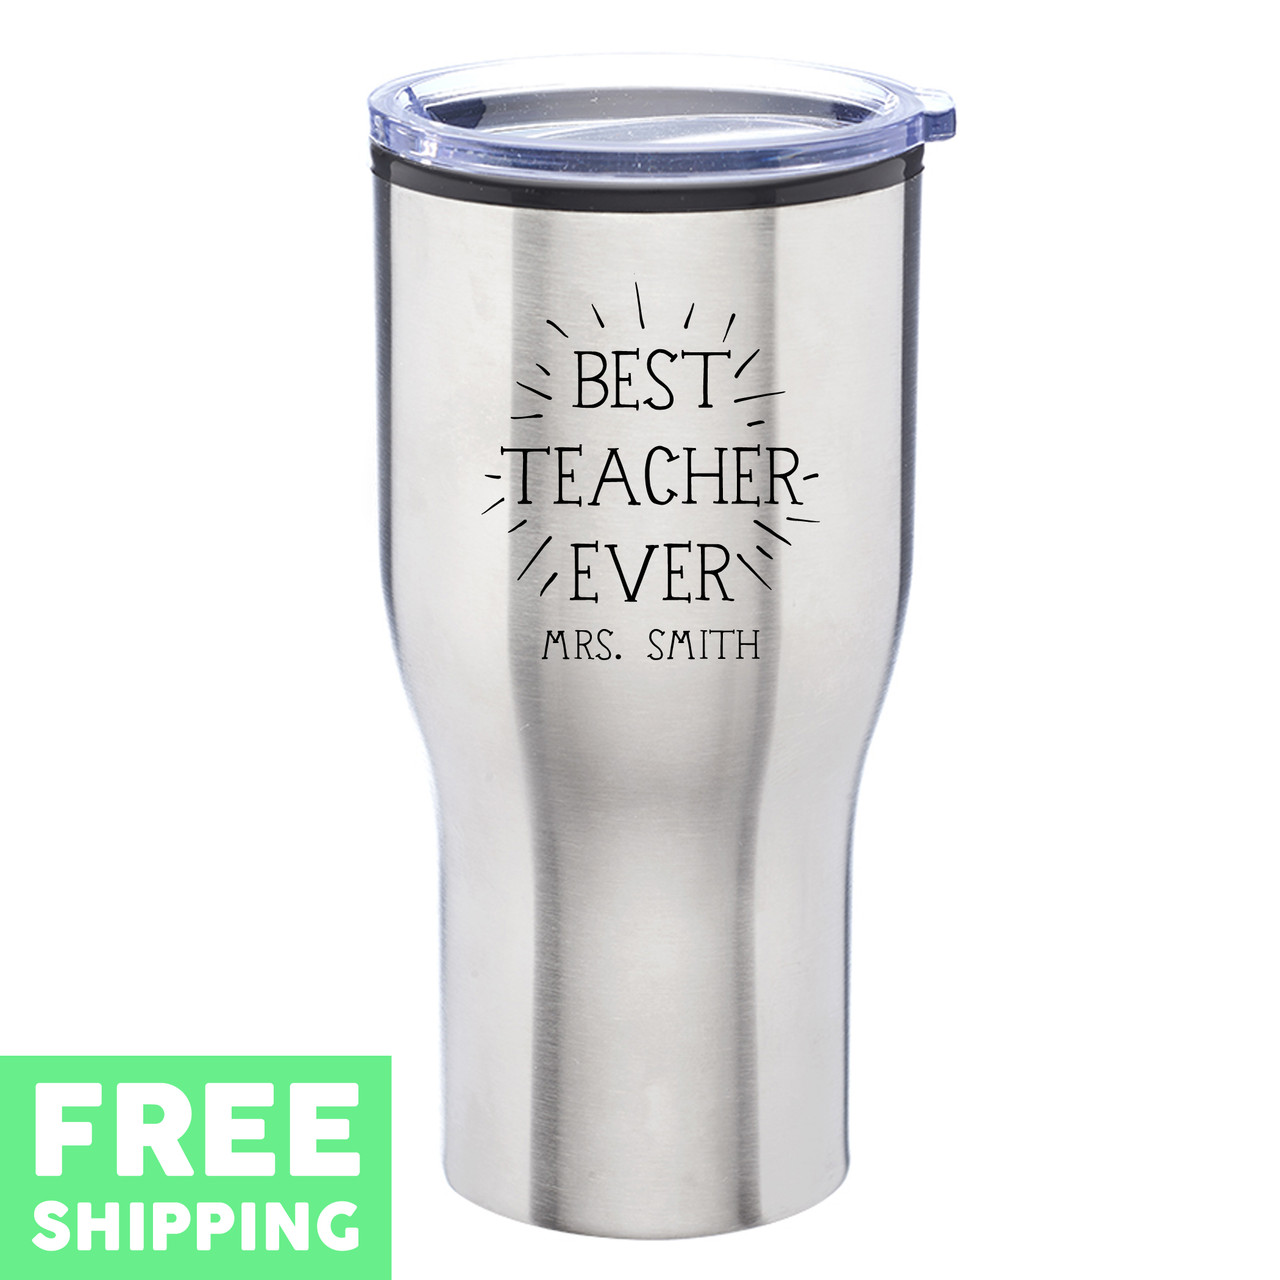 https://cdn11.bigcommerce.com/s-pza6oiin/images/stencil/1280x1280/products/9919/17327/customnamebestteacherever_28_oz_Challenger_Stainless_Steel_Travel_Mugs_silver_3569_freeshipping__44564.1588706230.jpg?c=2?imbypass=on